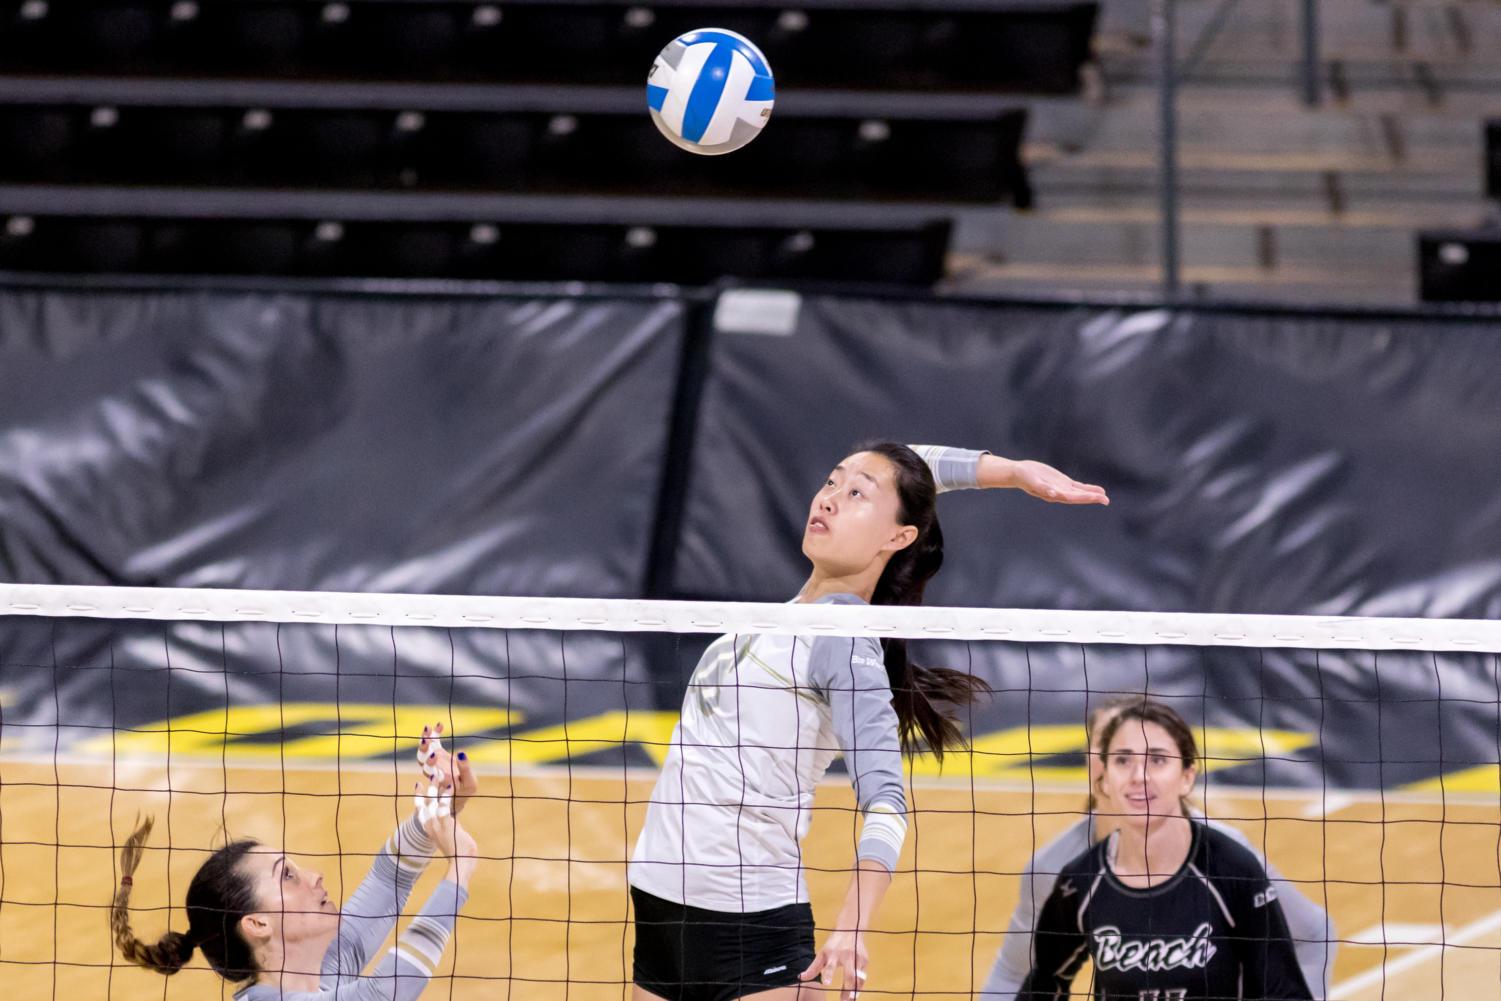 Long Beach State sophomore middle blocker YiZhi Xue spikes the ball in Friday's match against UC Davis at the Walter Pyramid.